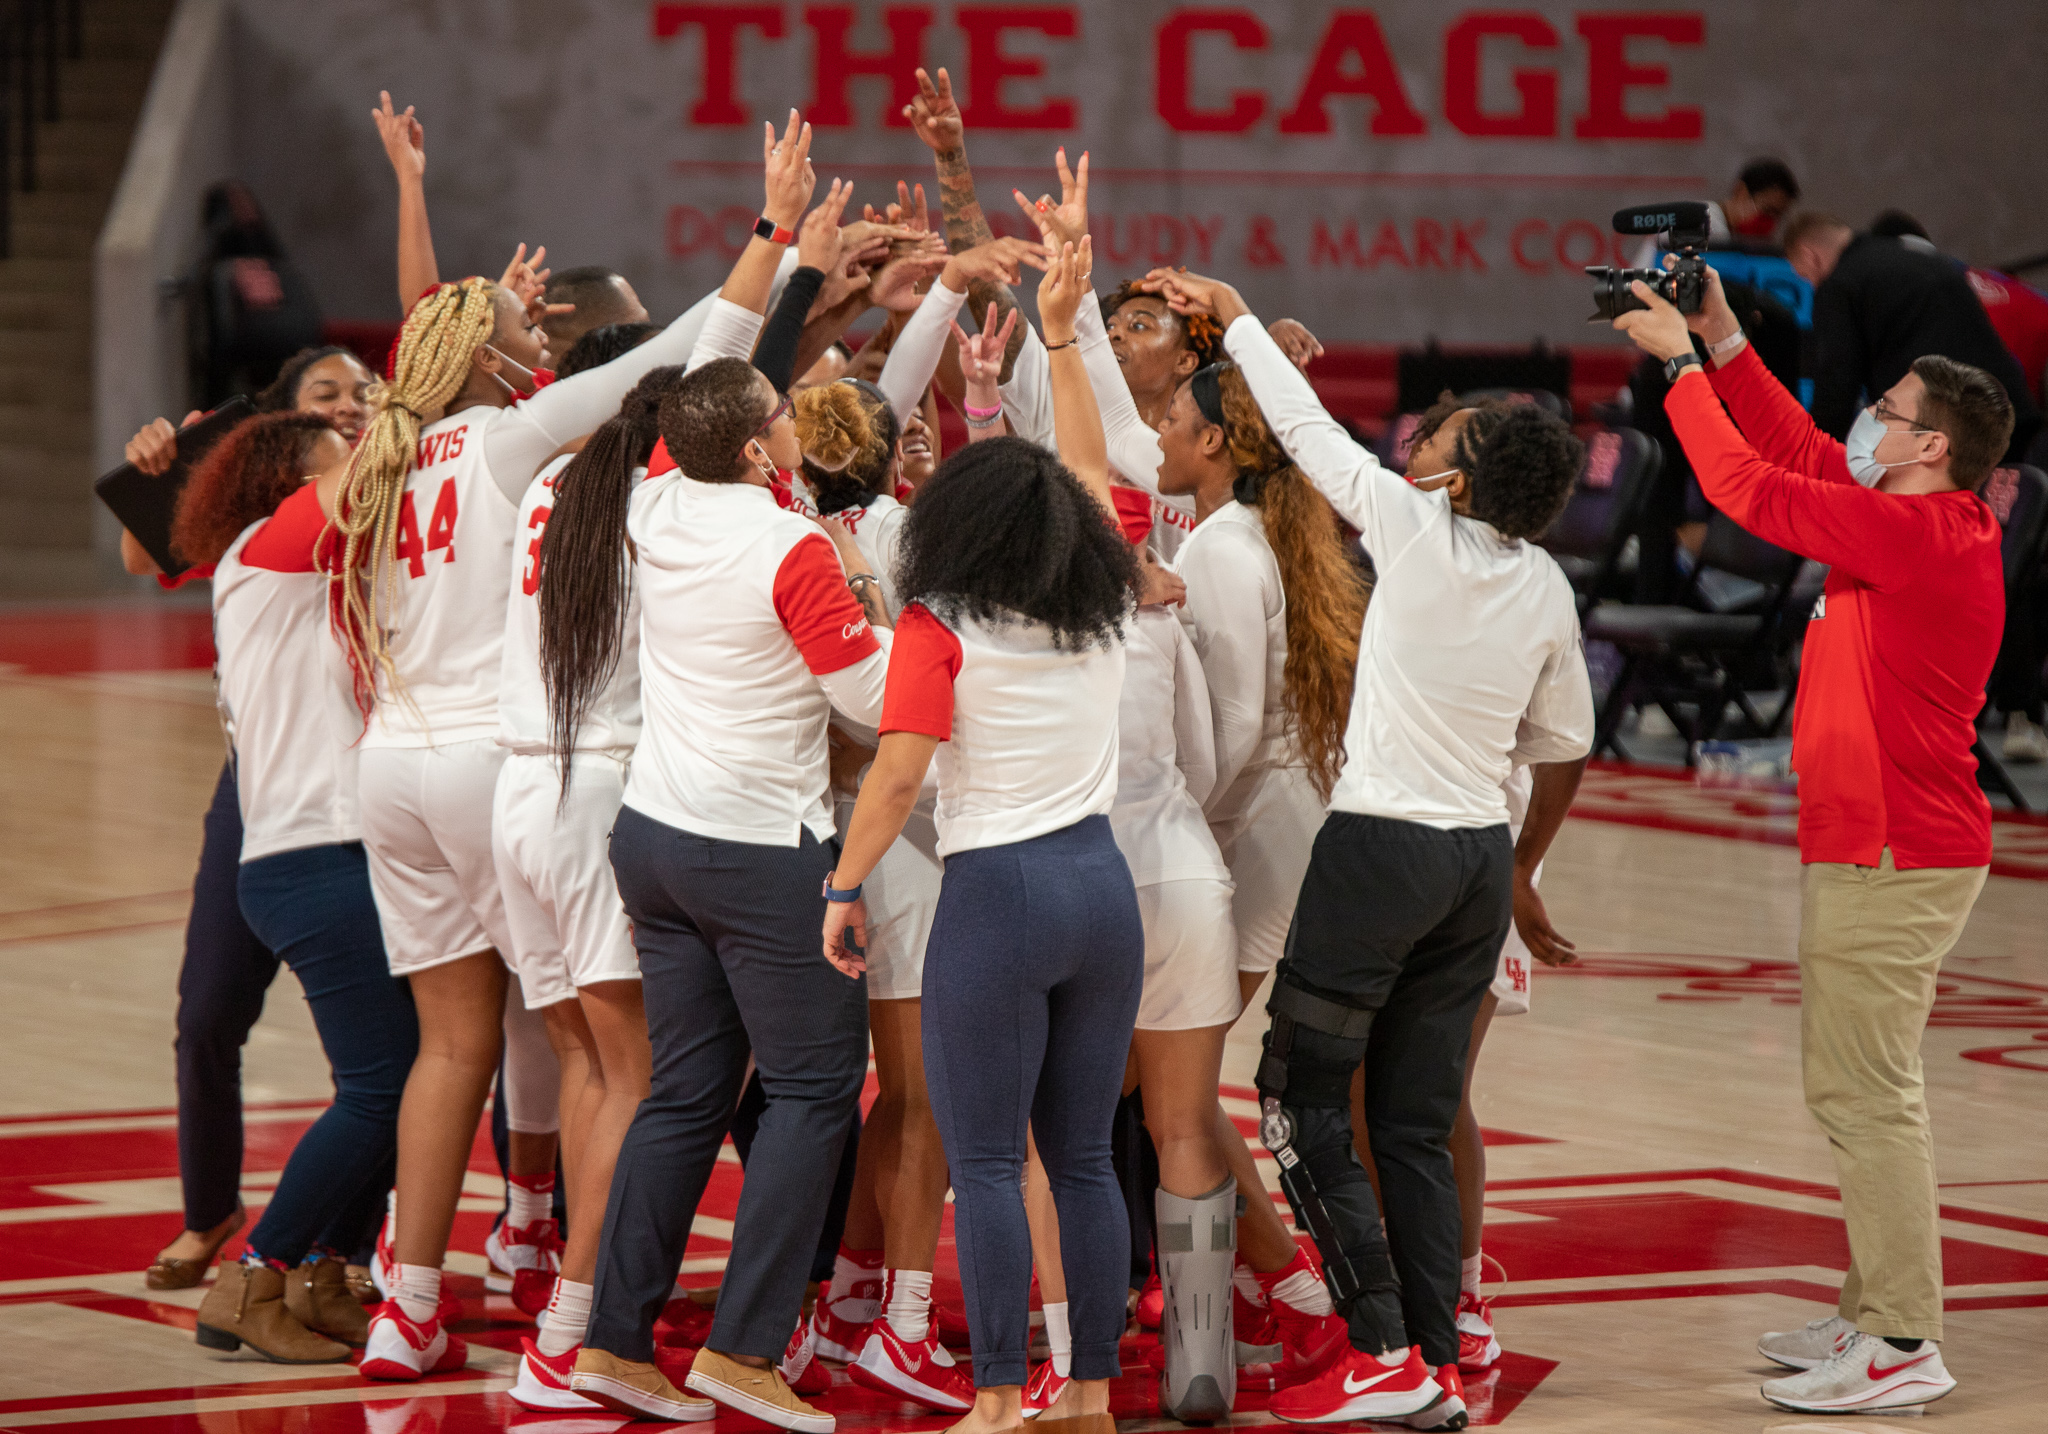 The UH women's basketball team coaches and players come together at the half-court line and celebrate their win over No. 13 USF. | Andy Yanez/The Cougar